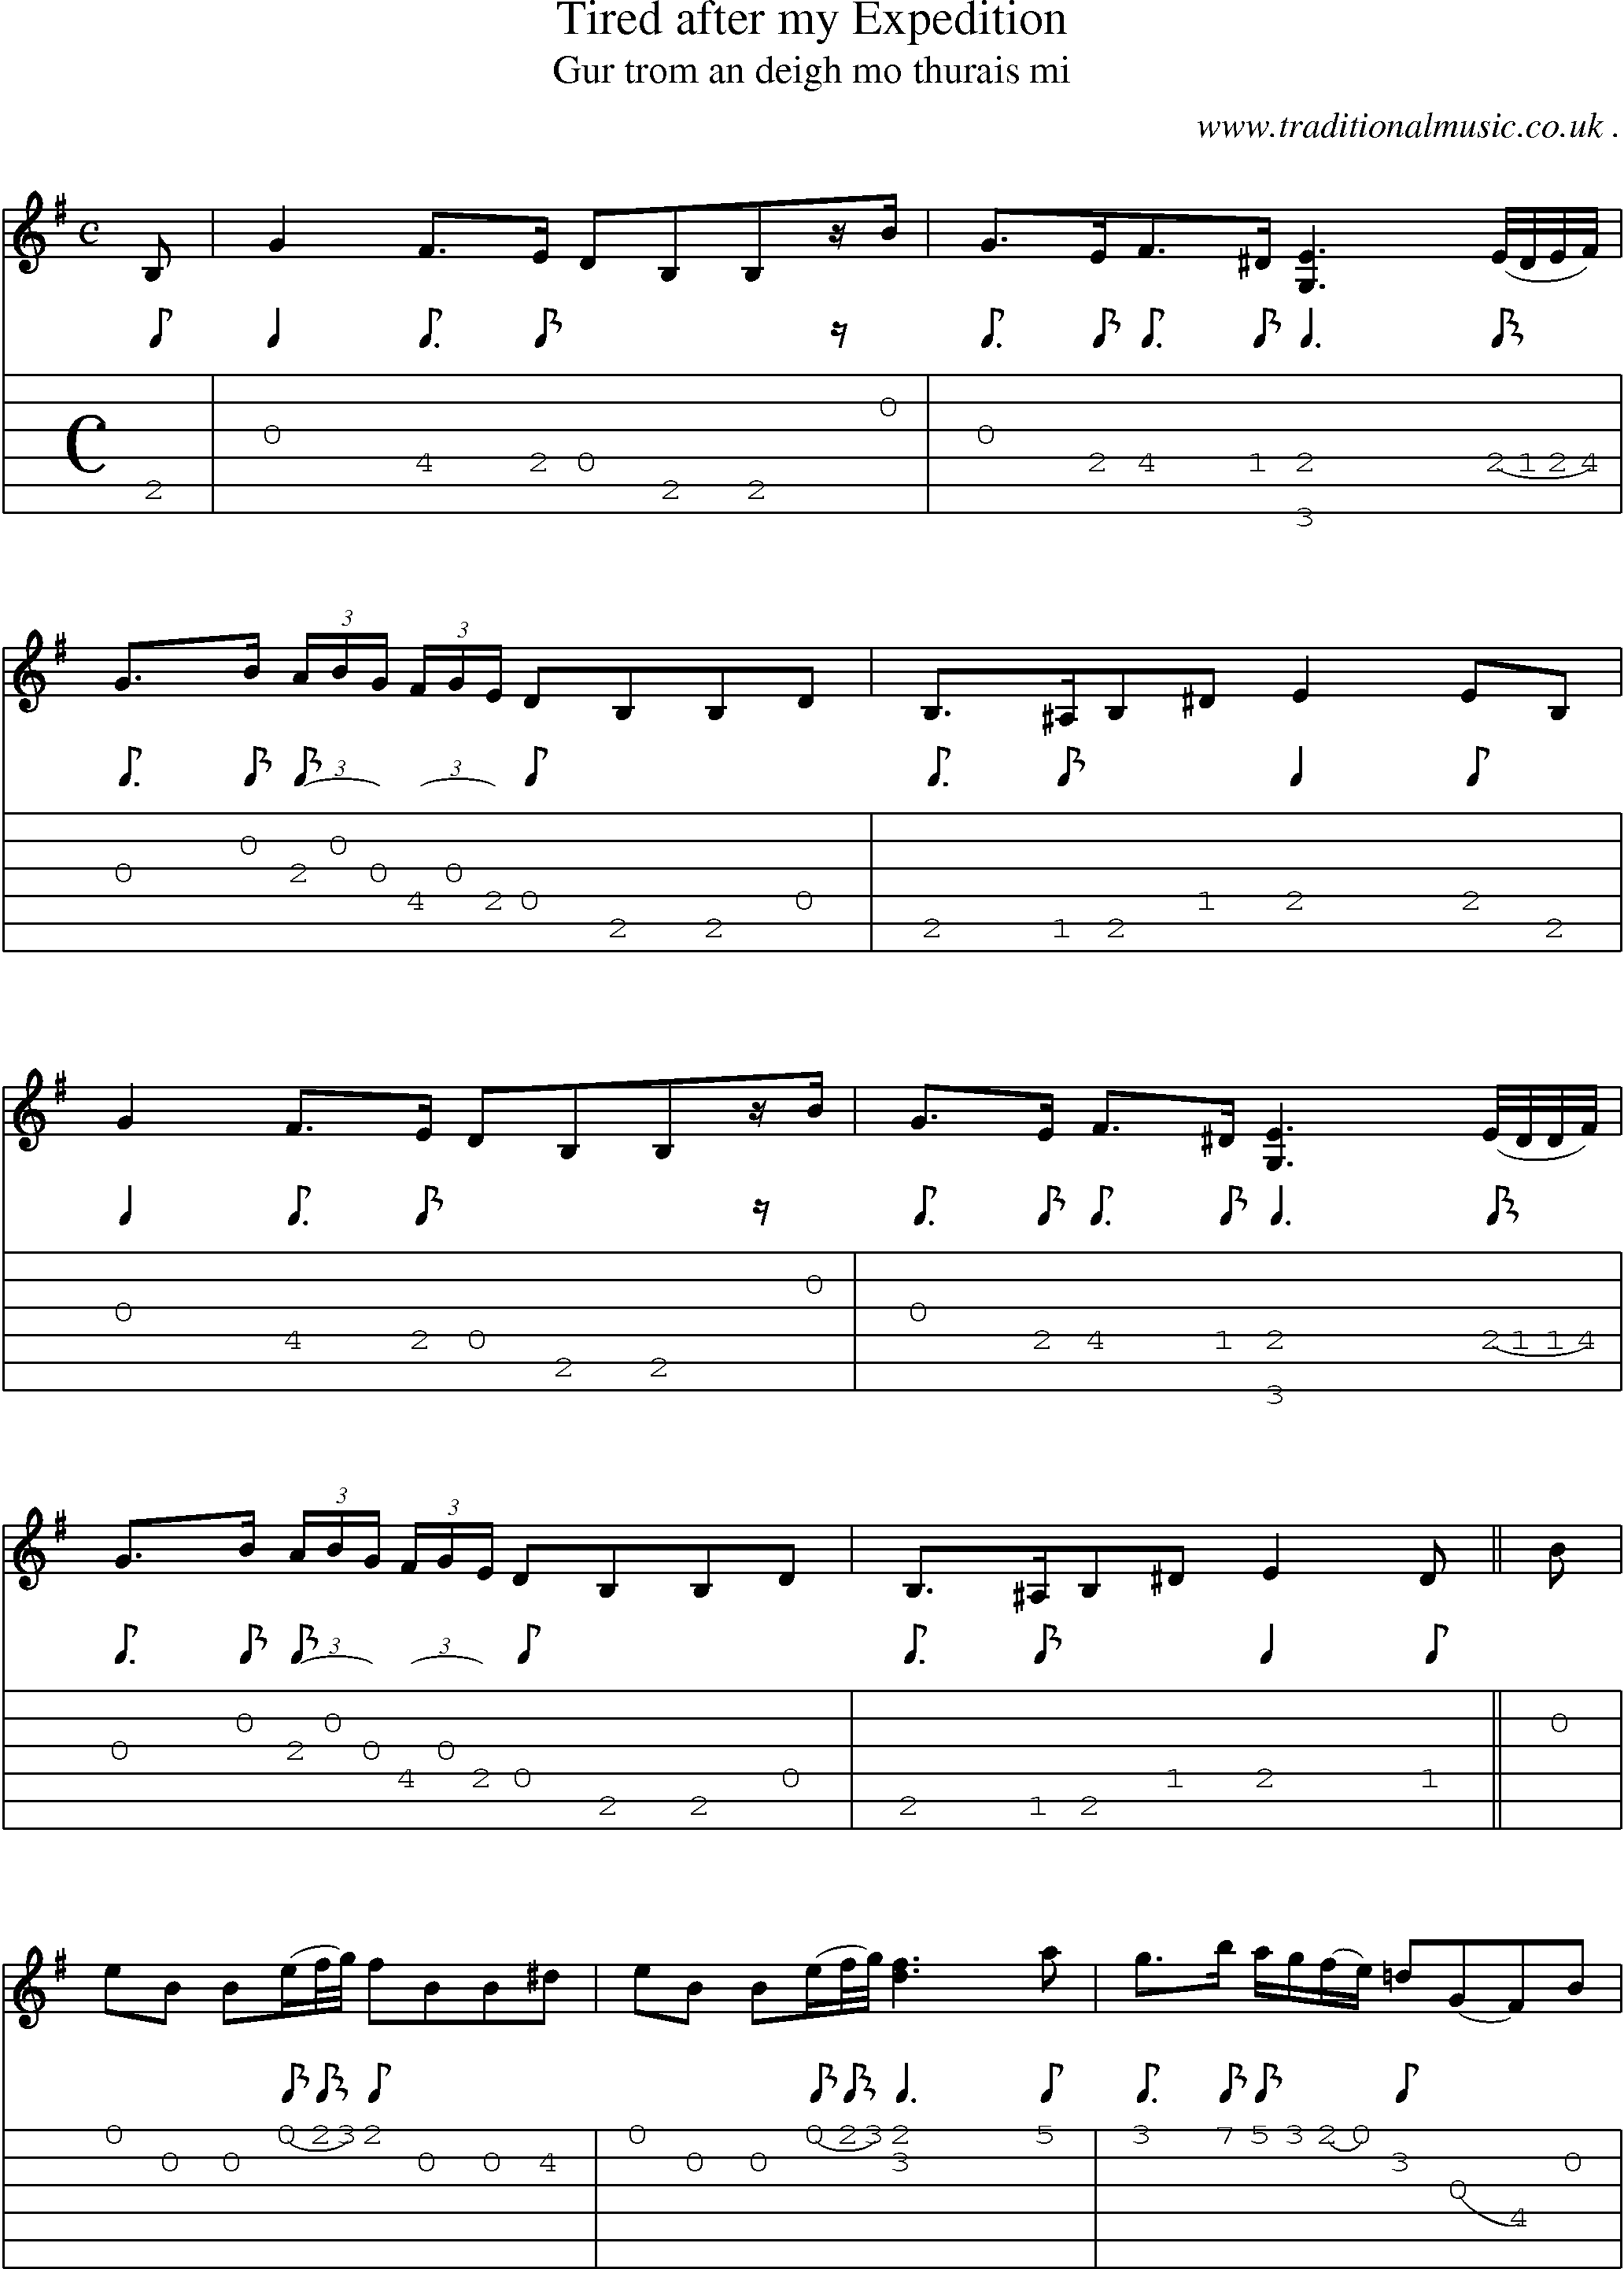 Sheet-music  score, Chords and Guitar Tabs for Tired After My Expedition